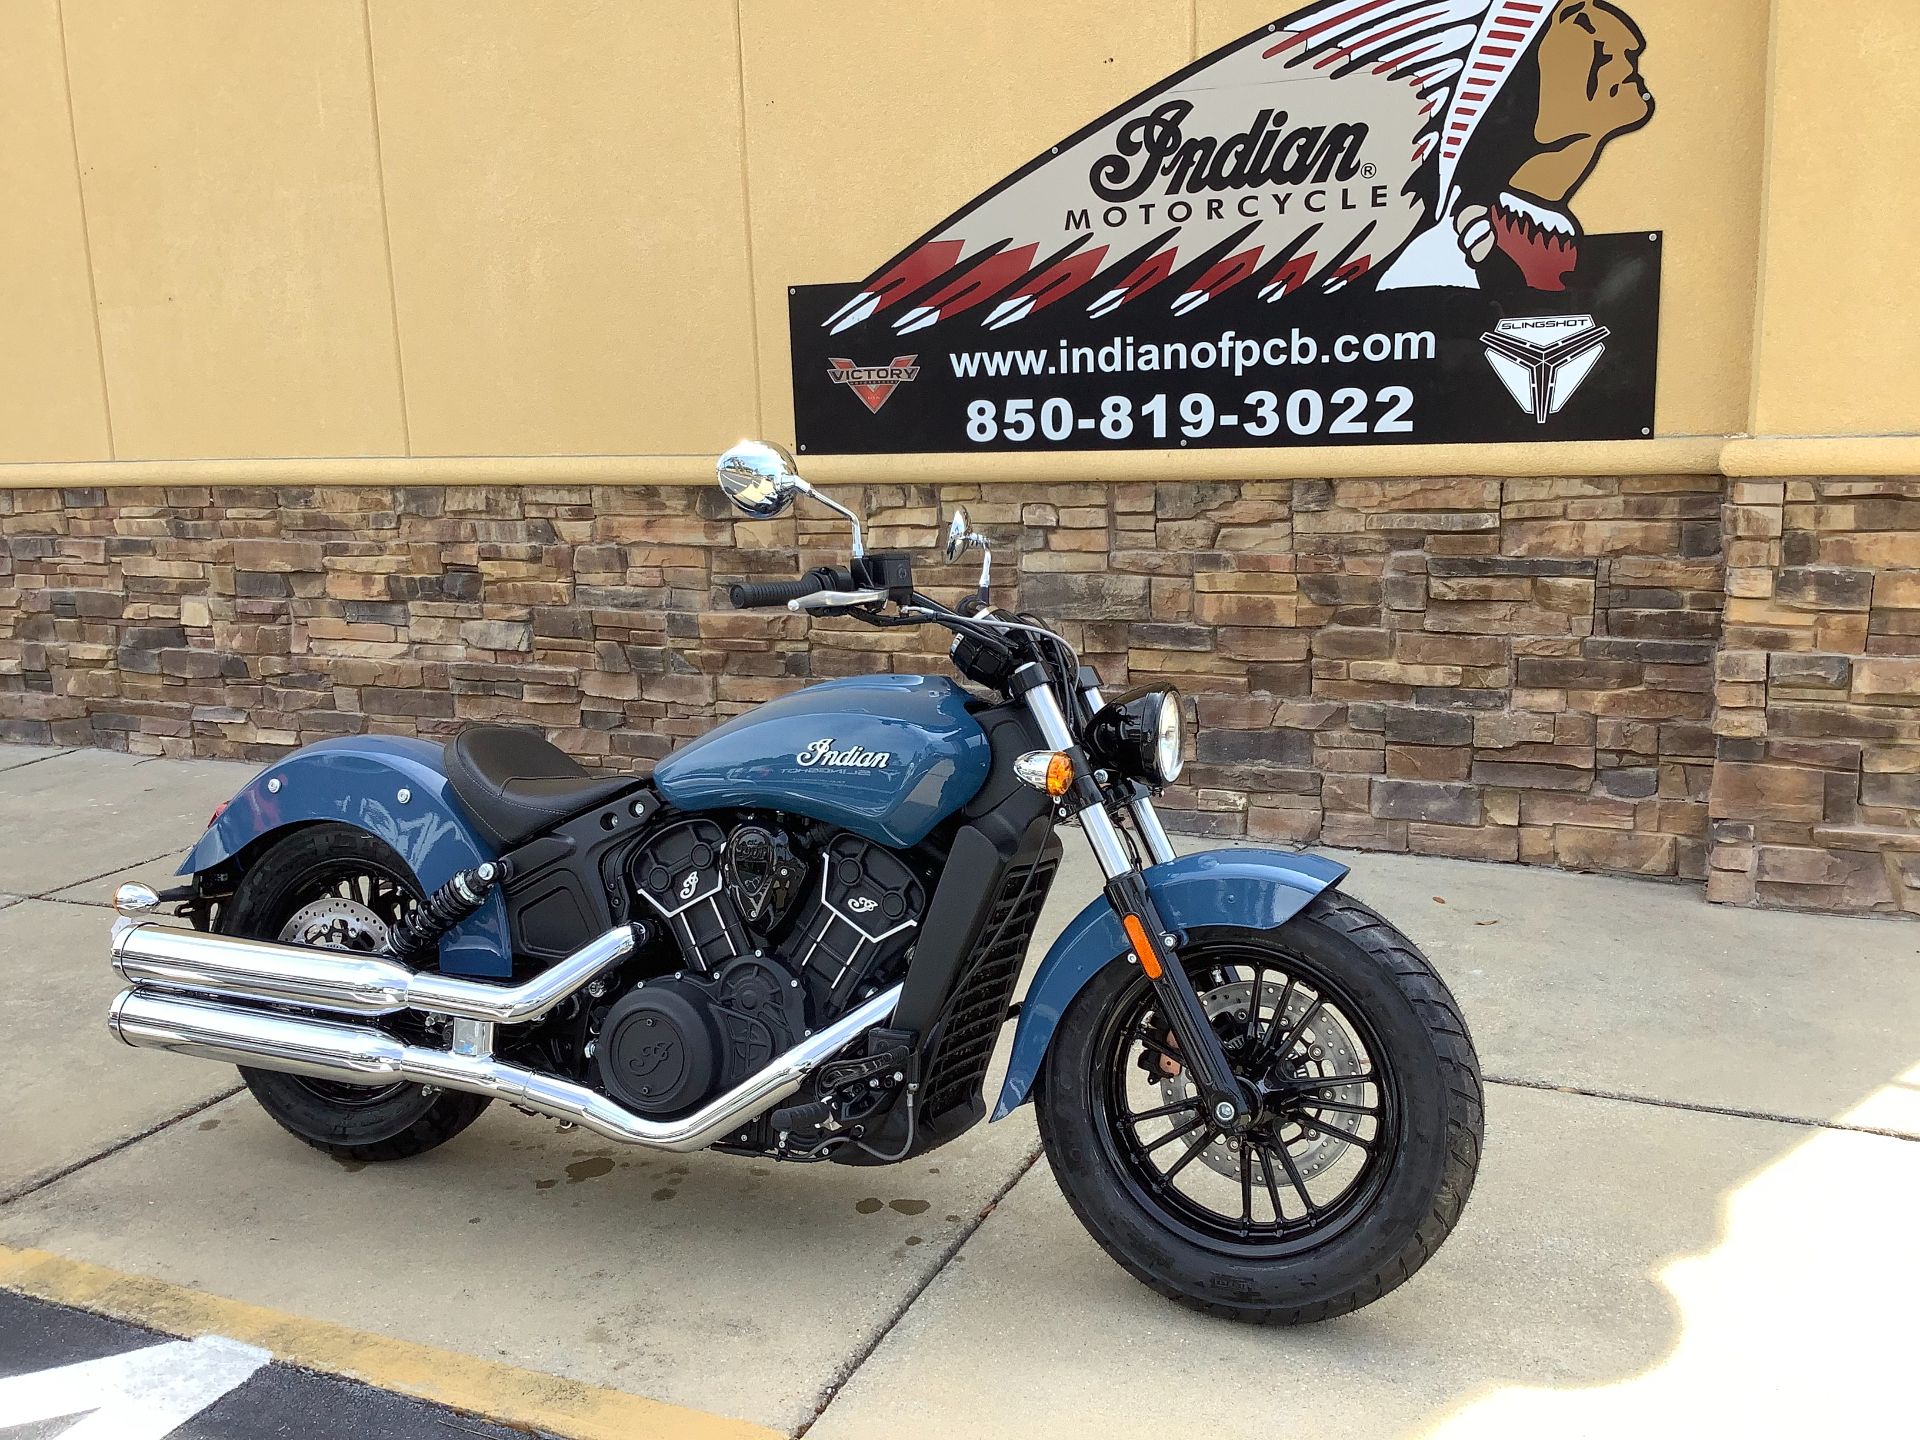 2022 Indian SCOUT 60 in Panama City Beach, Florida - Photo 2